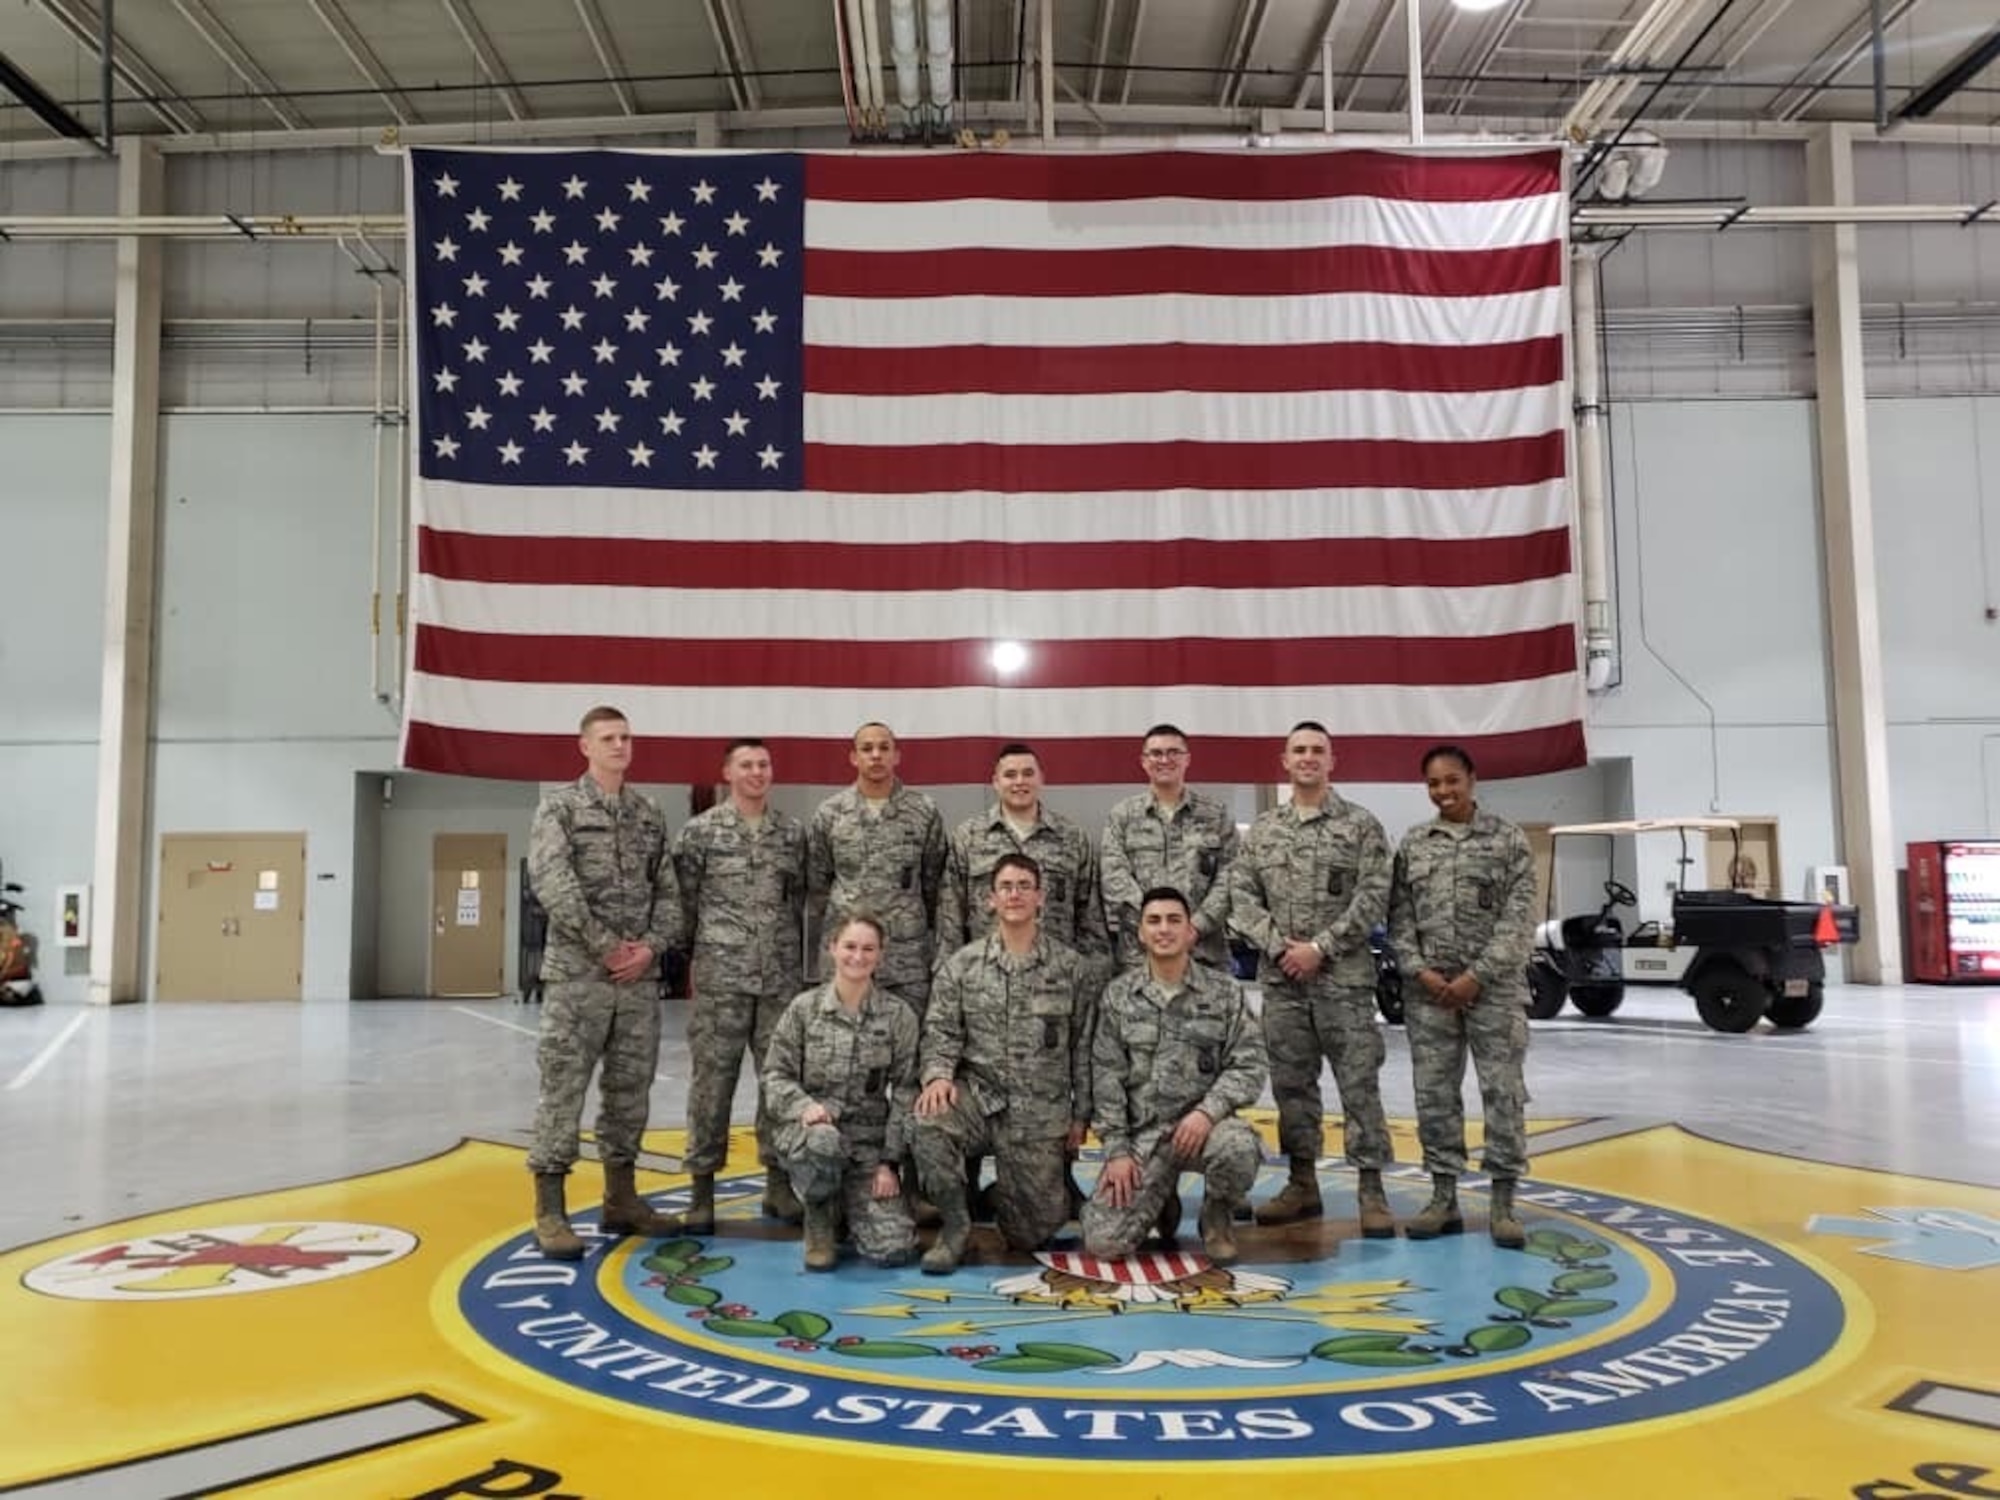 A large group photo with U.S. Air Force Airman 1st Class Kayla Jerido, 86th Civil Engineer Squadron fire protection apprentice, far right, posing with her classmates after graduating from the Louis F. Garland Department of Defense Fire Academy at Goodfellow Air Force Base, Texas, July 15, 2018.